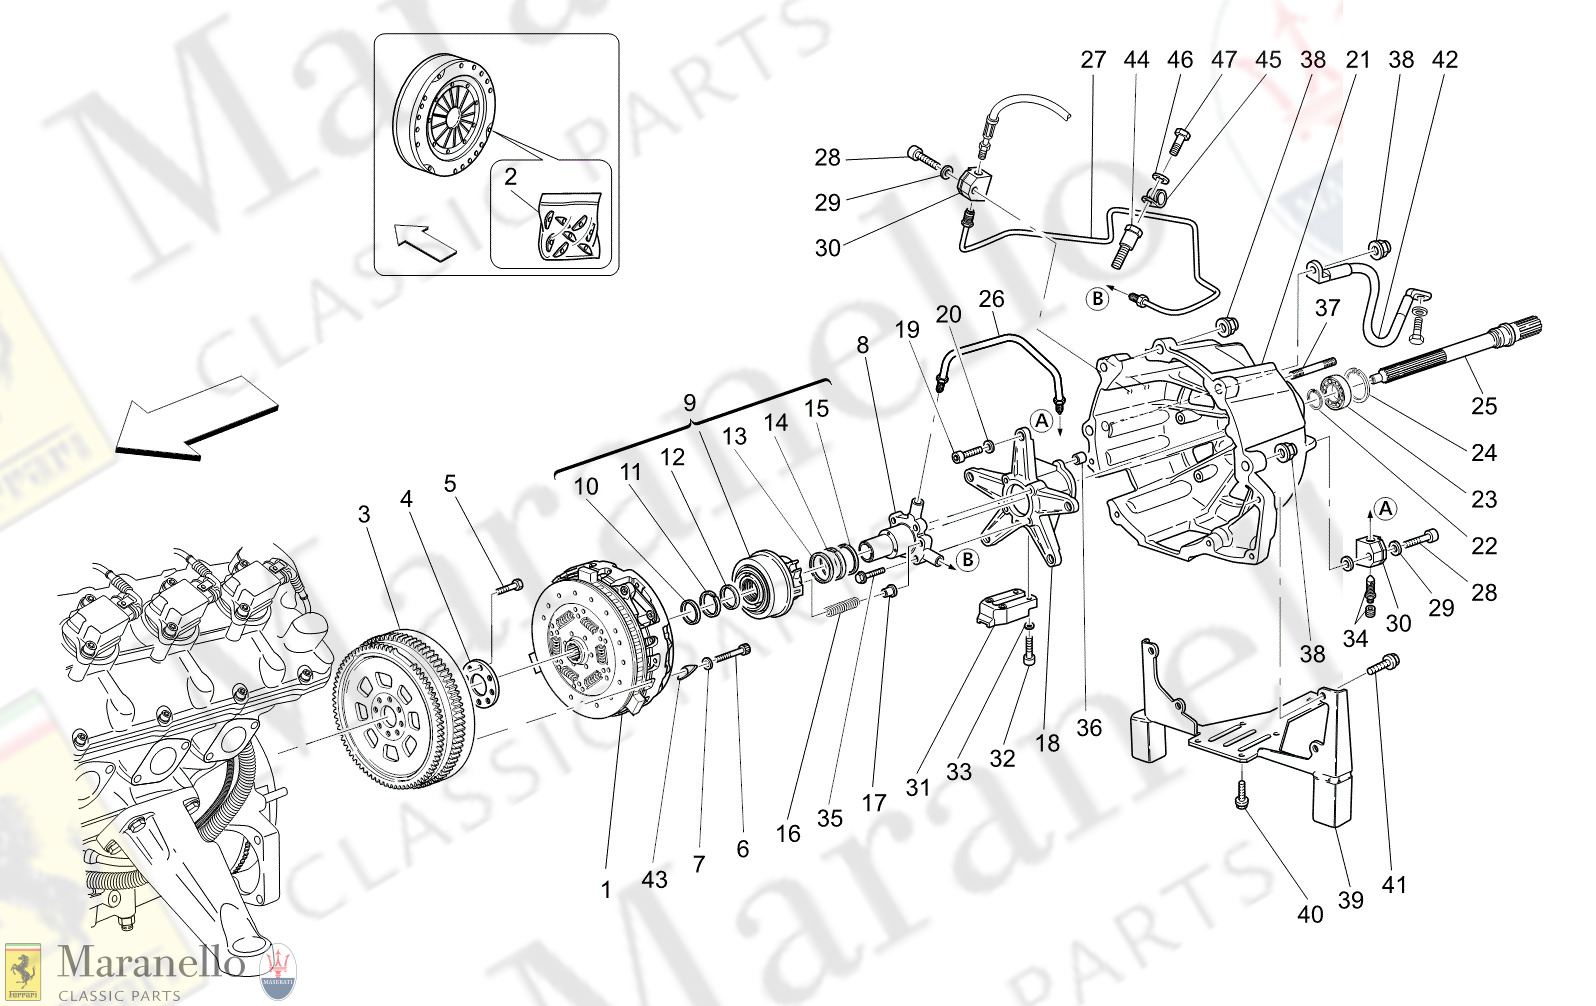 M2.10 - 13 - M210 - 13 Clutch Discs And Housing For Mechanical Gearbox